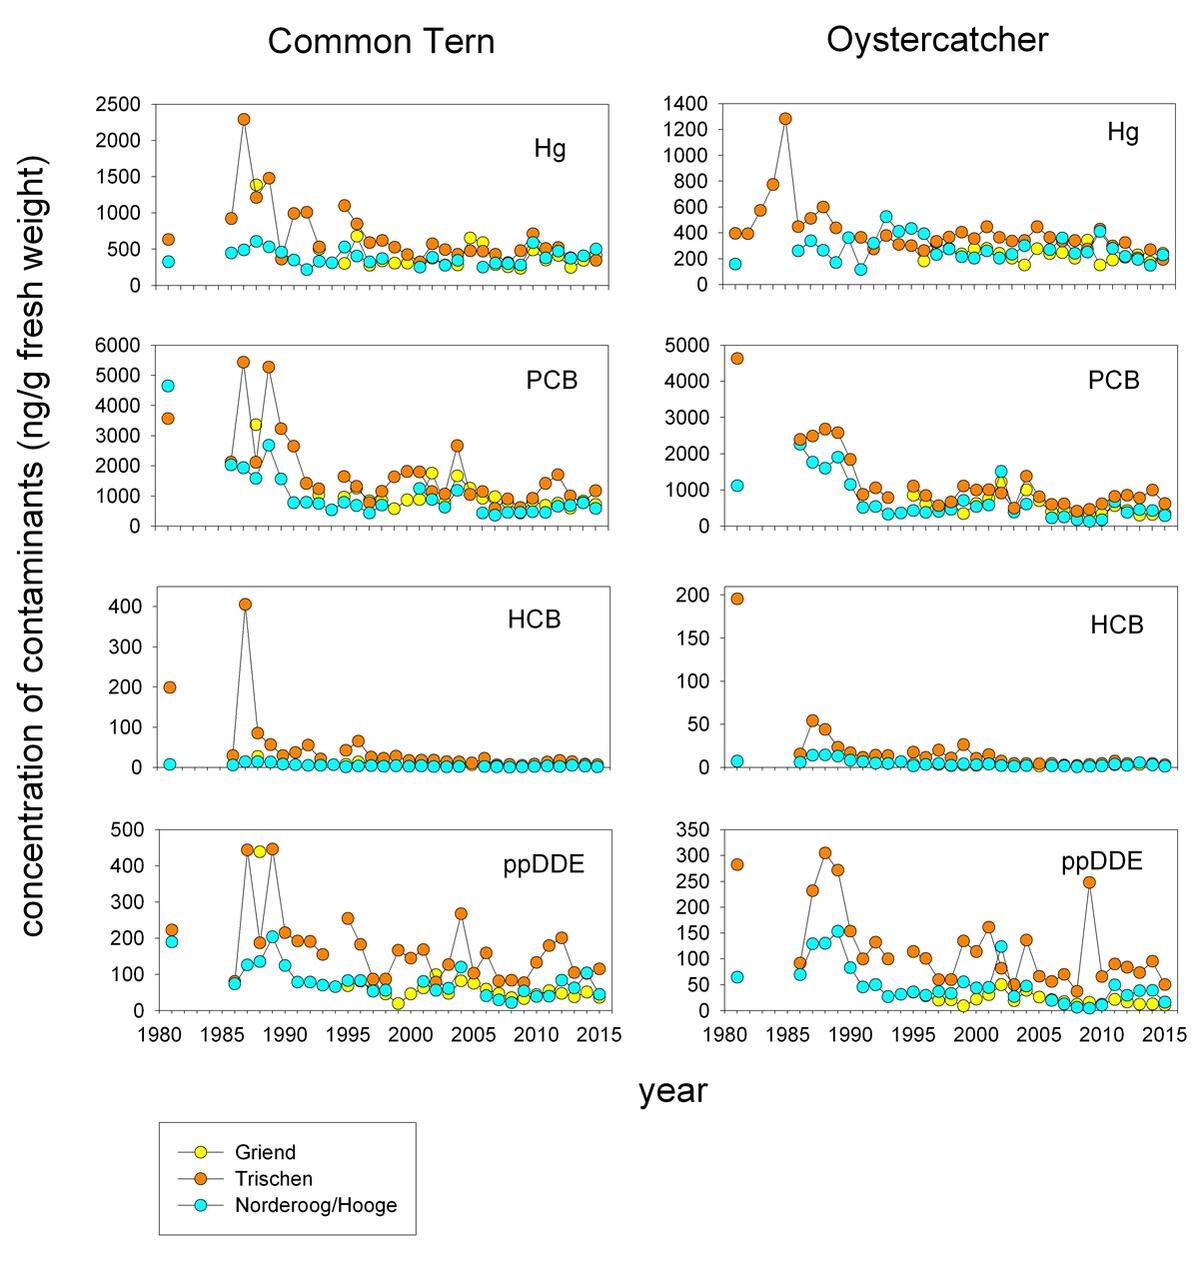 Figure 5. Long-term (1981-2015) trends of concentrations of mercury, PCBs, HCB and ppDDE in common tern and oystercatcher eggs from three selected breeding sites in the Wadden Sea